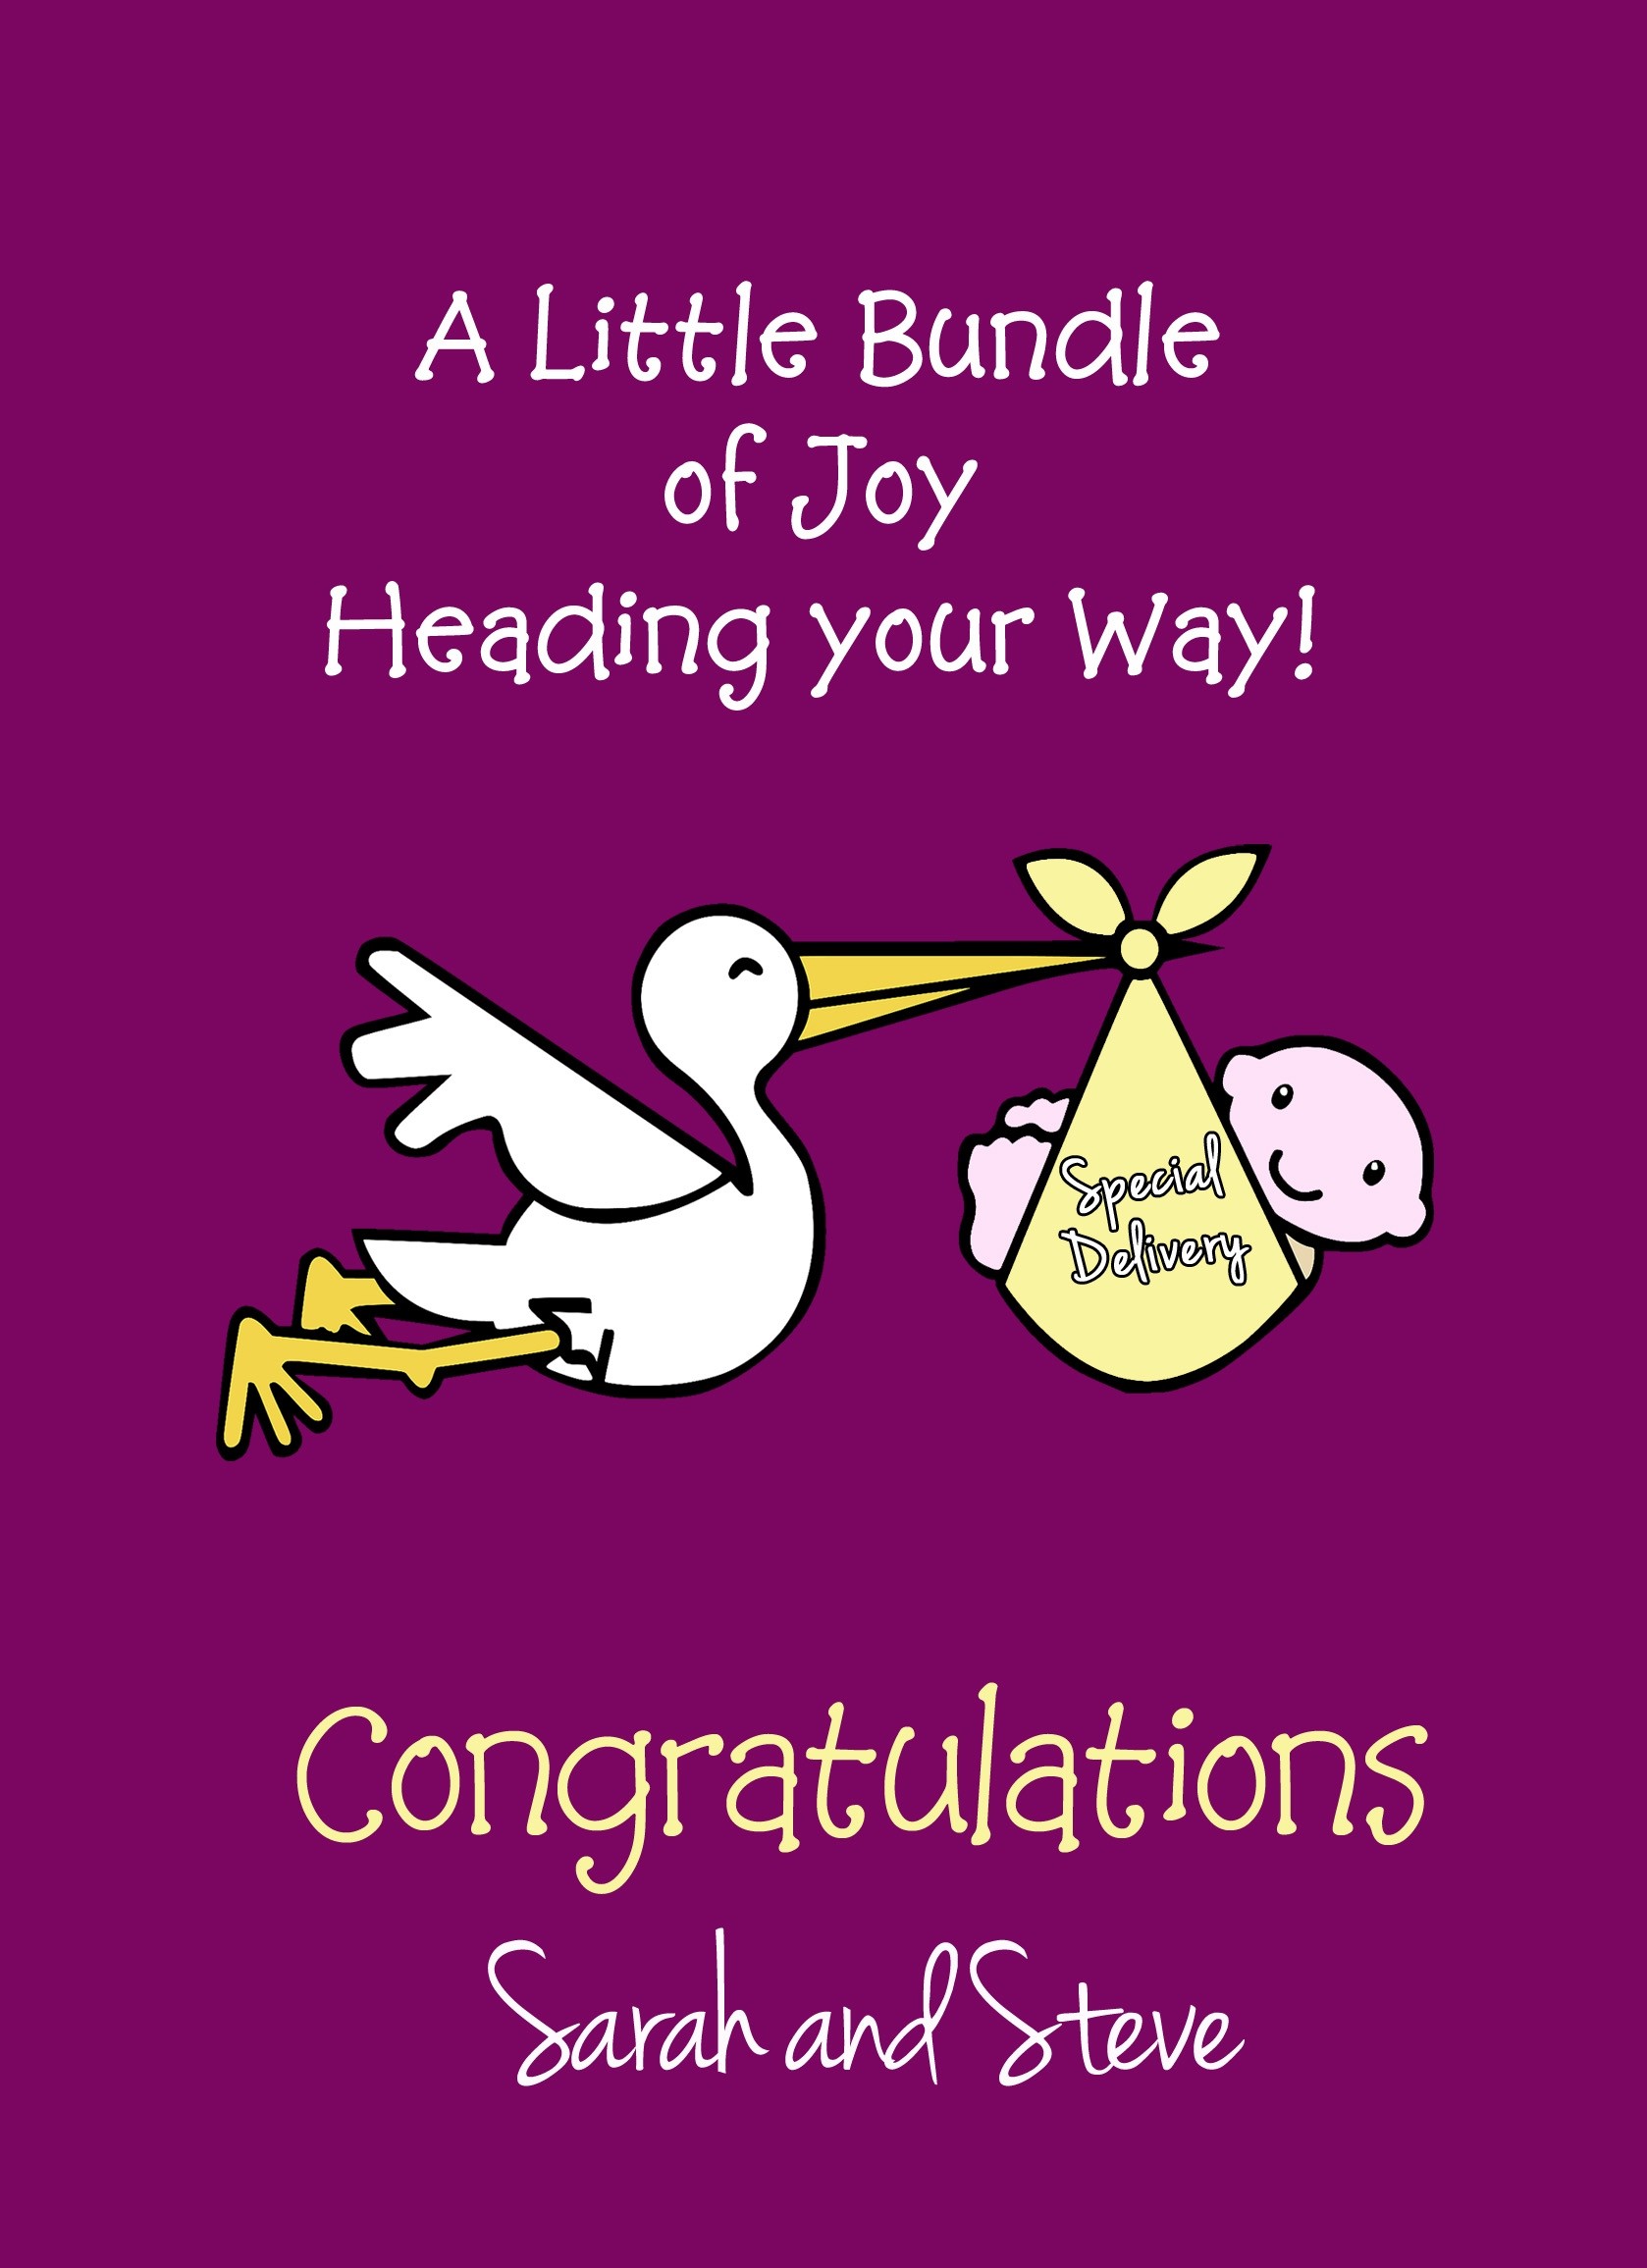 Personalised You're Having a Baby Pregnancy Card (Purple, Stork)